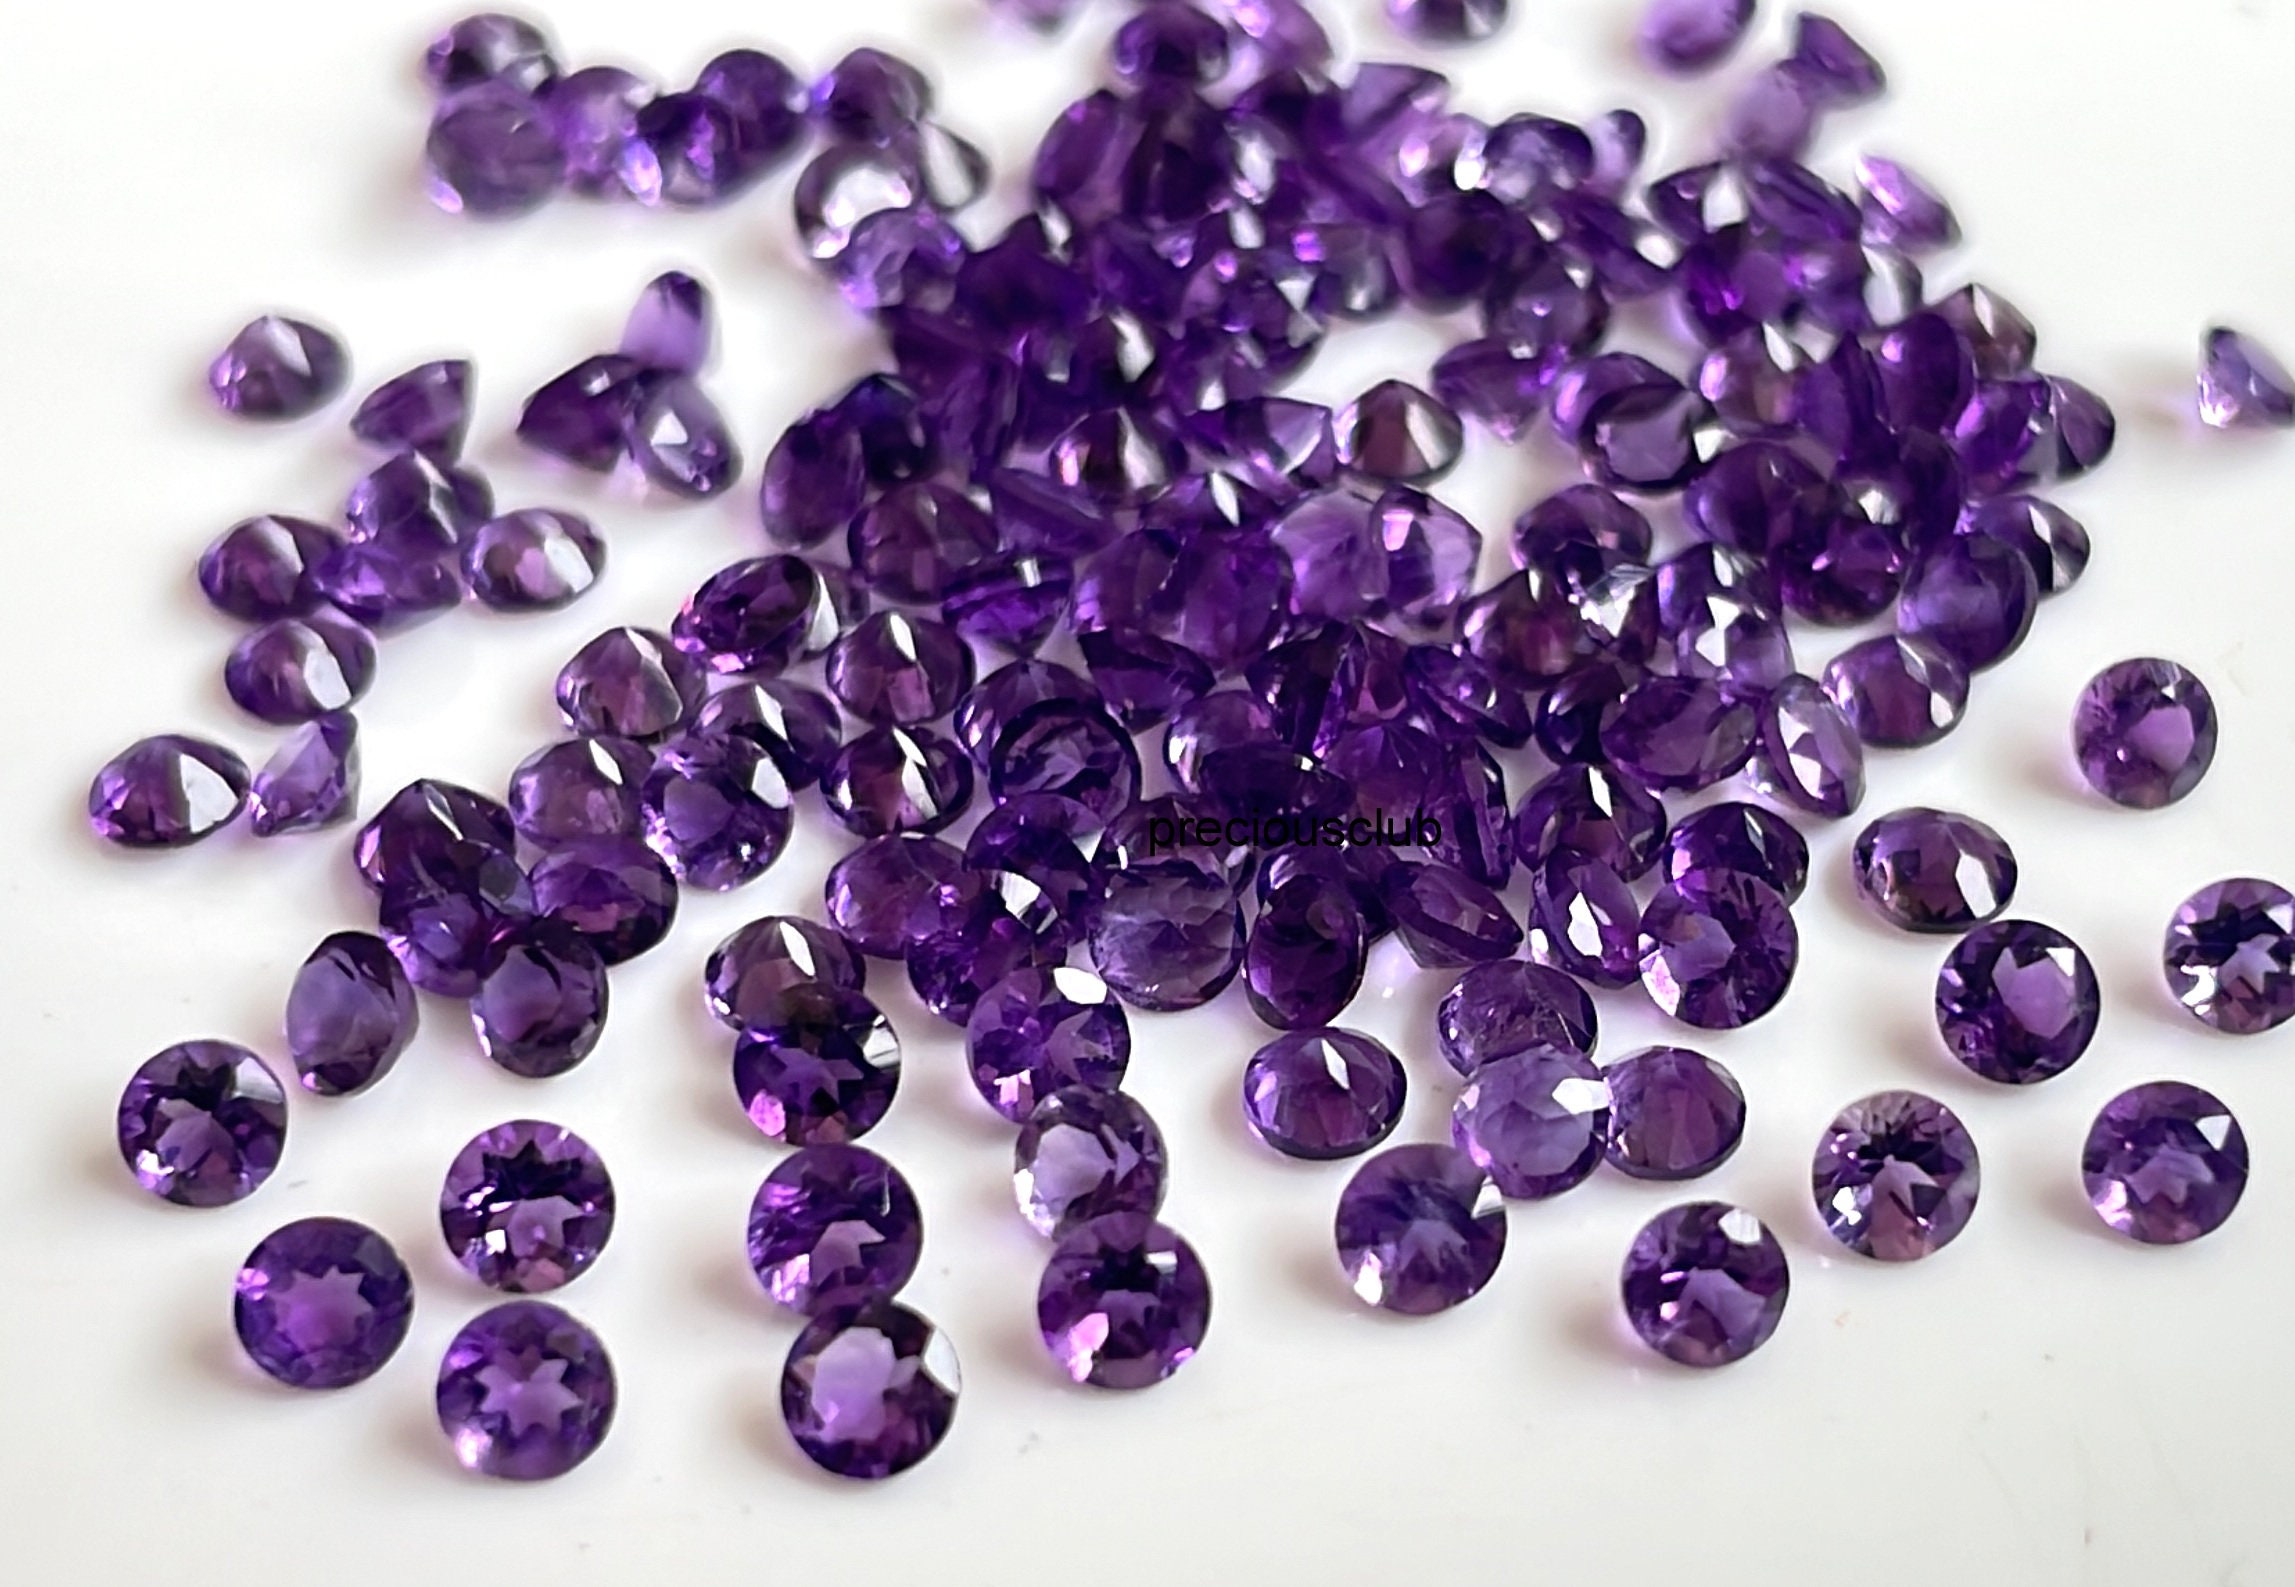 Large Hole Amethyst 4x8mm Heishi Beads with a 2.5mm Drilled Hole - approx.  8 inch strand